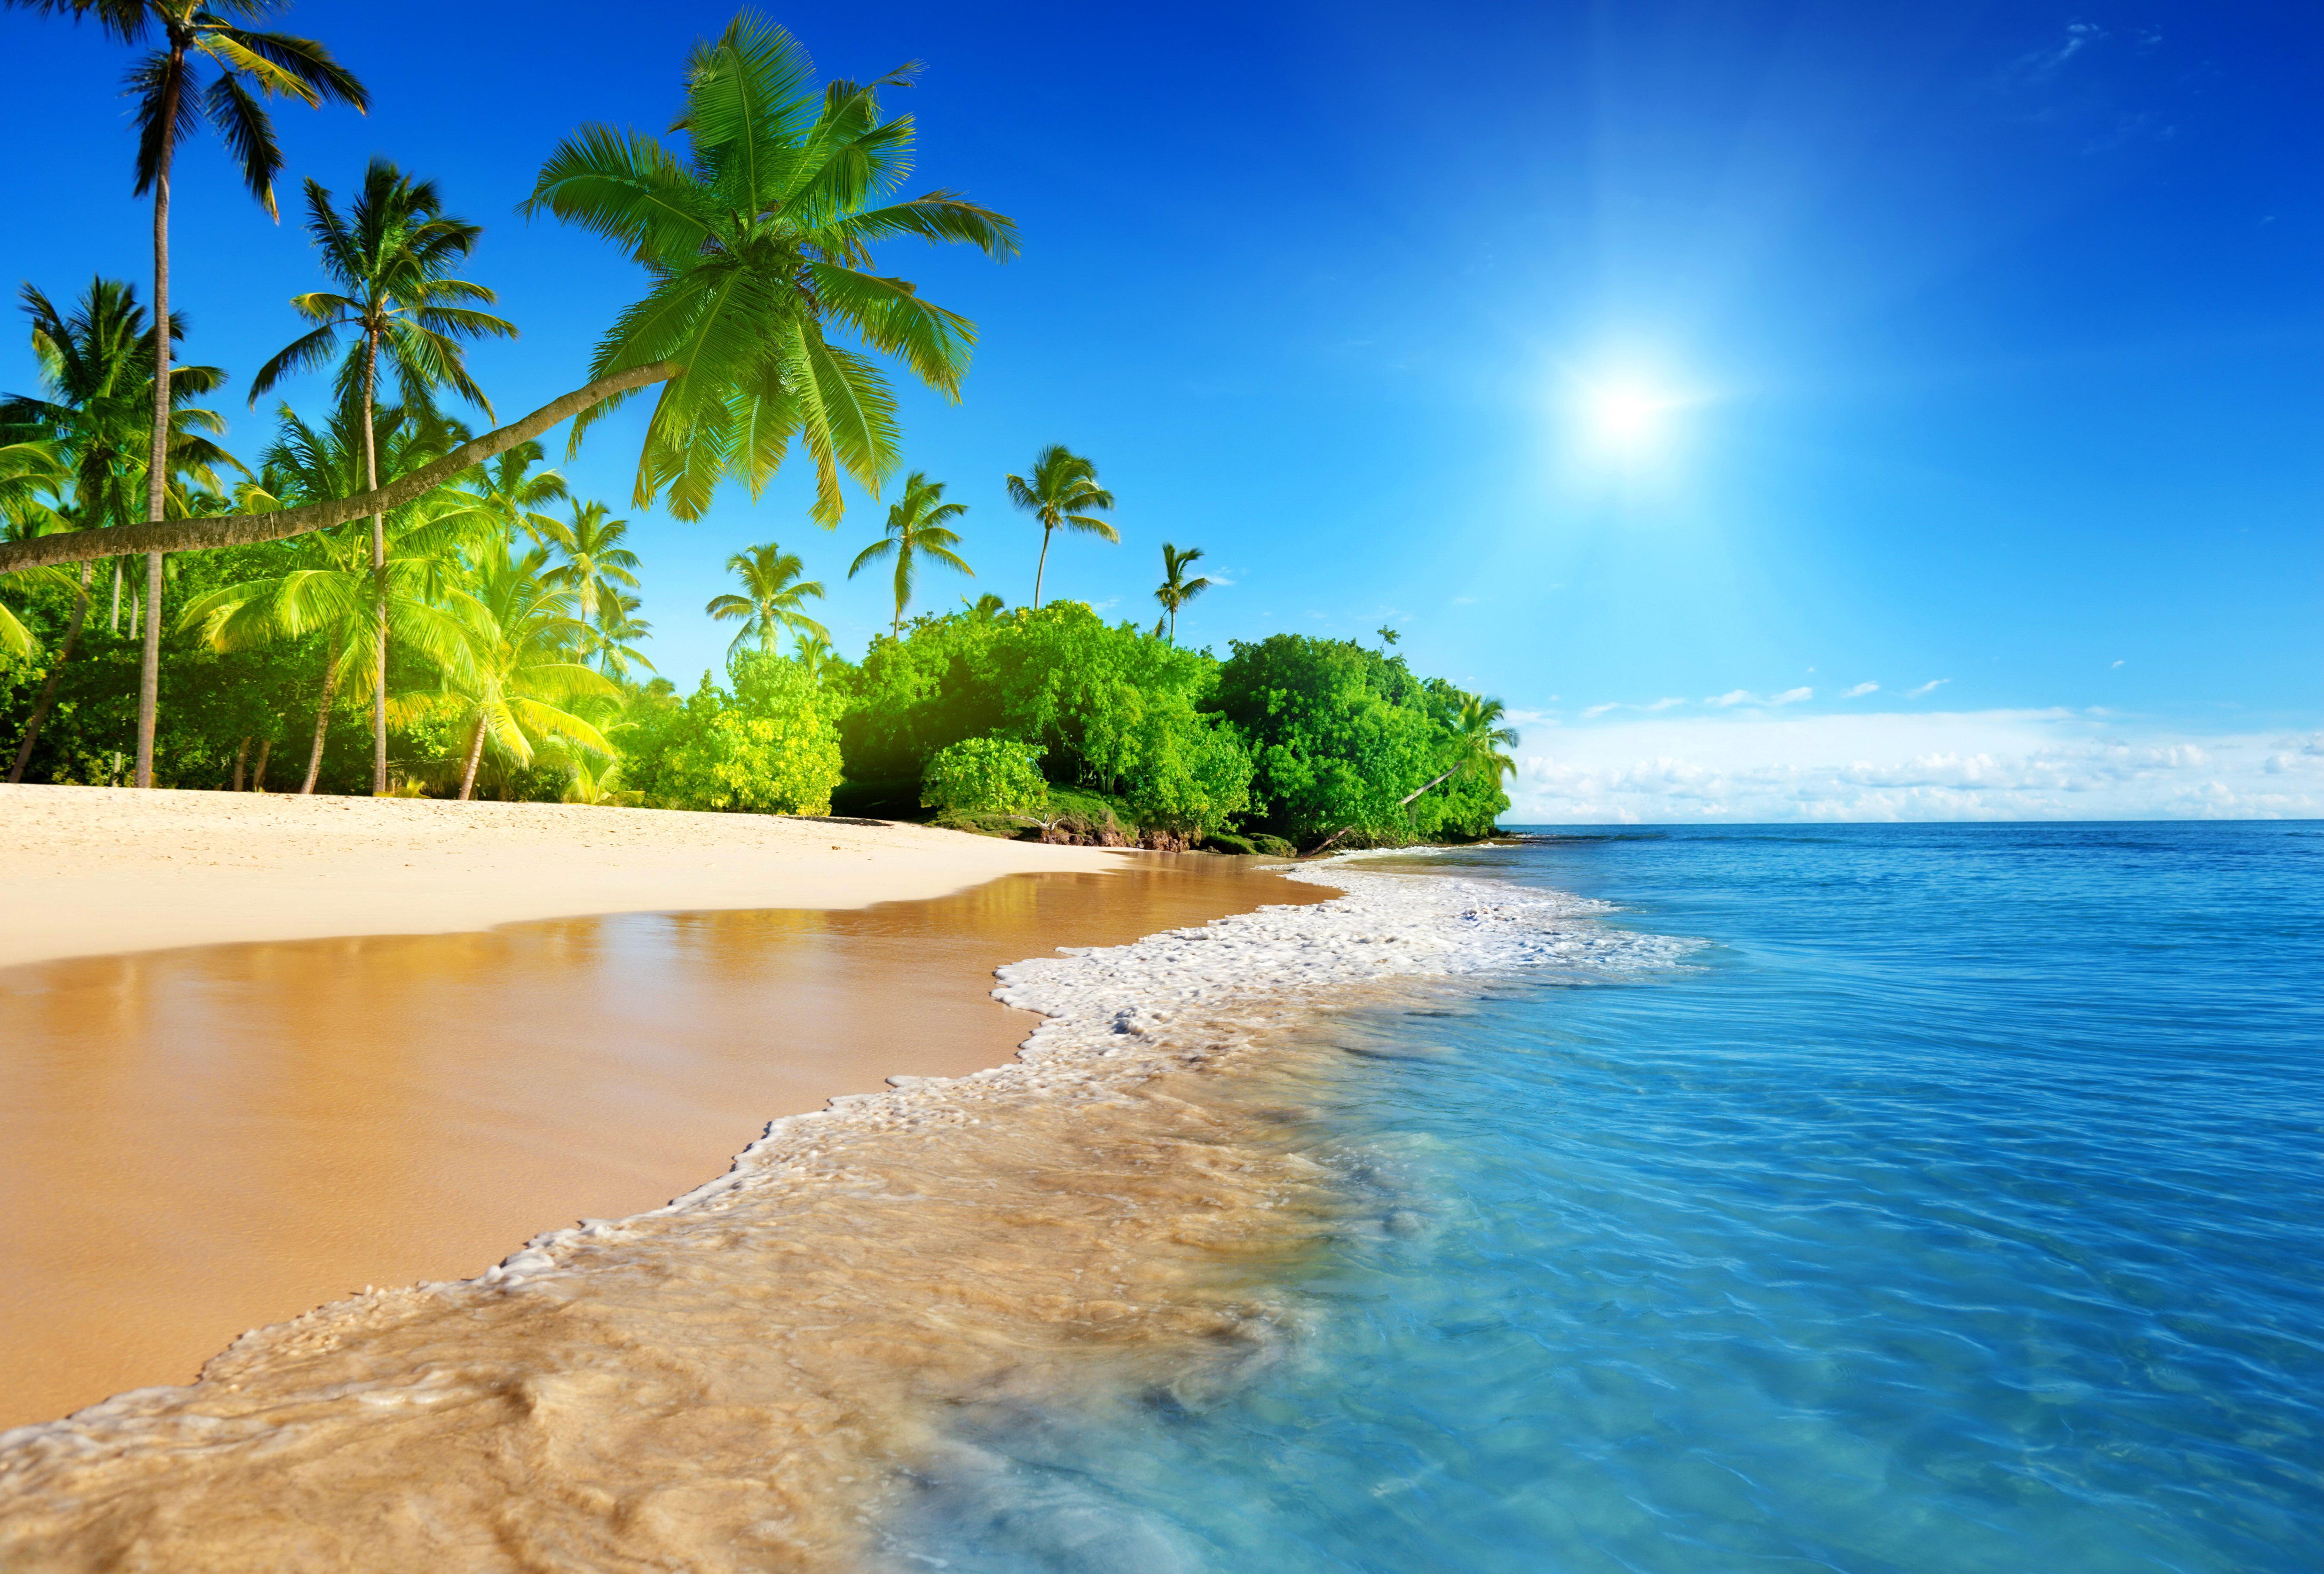 Earth Tropical HD Wallpaper | Background Image